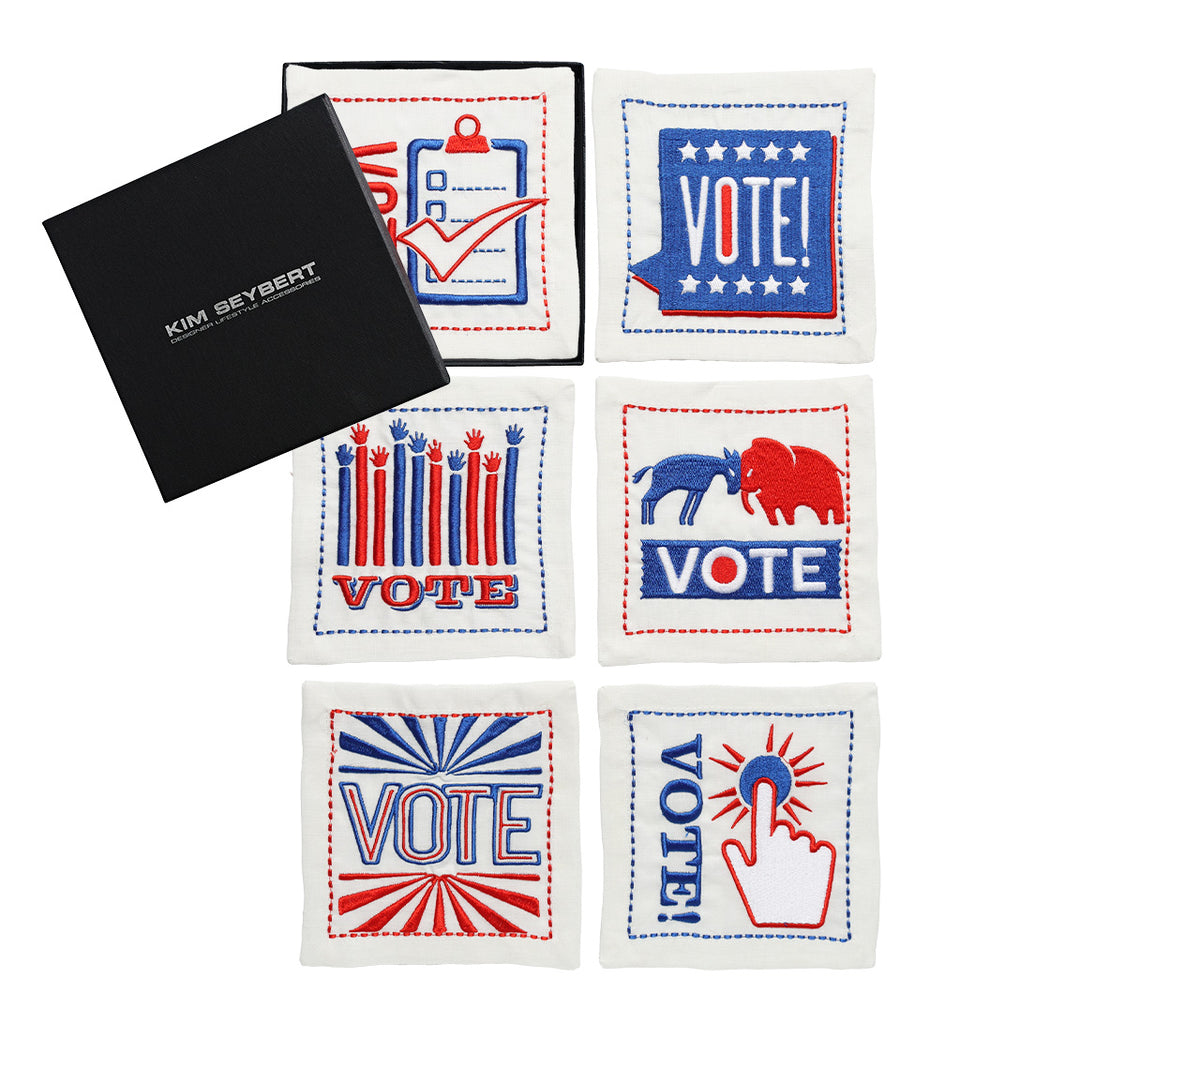 Vote Cocktail Napkin in Red, White & Blue, Set of 6 in a Gift Box